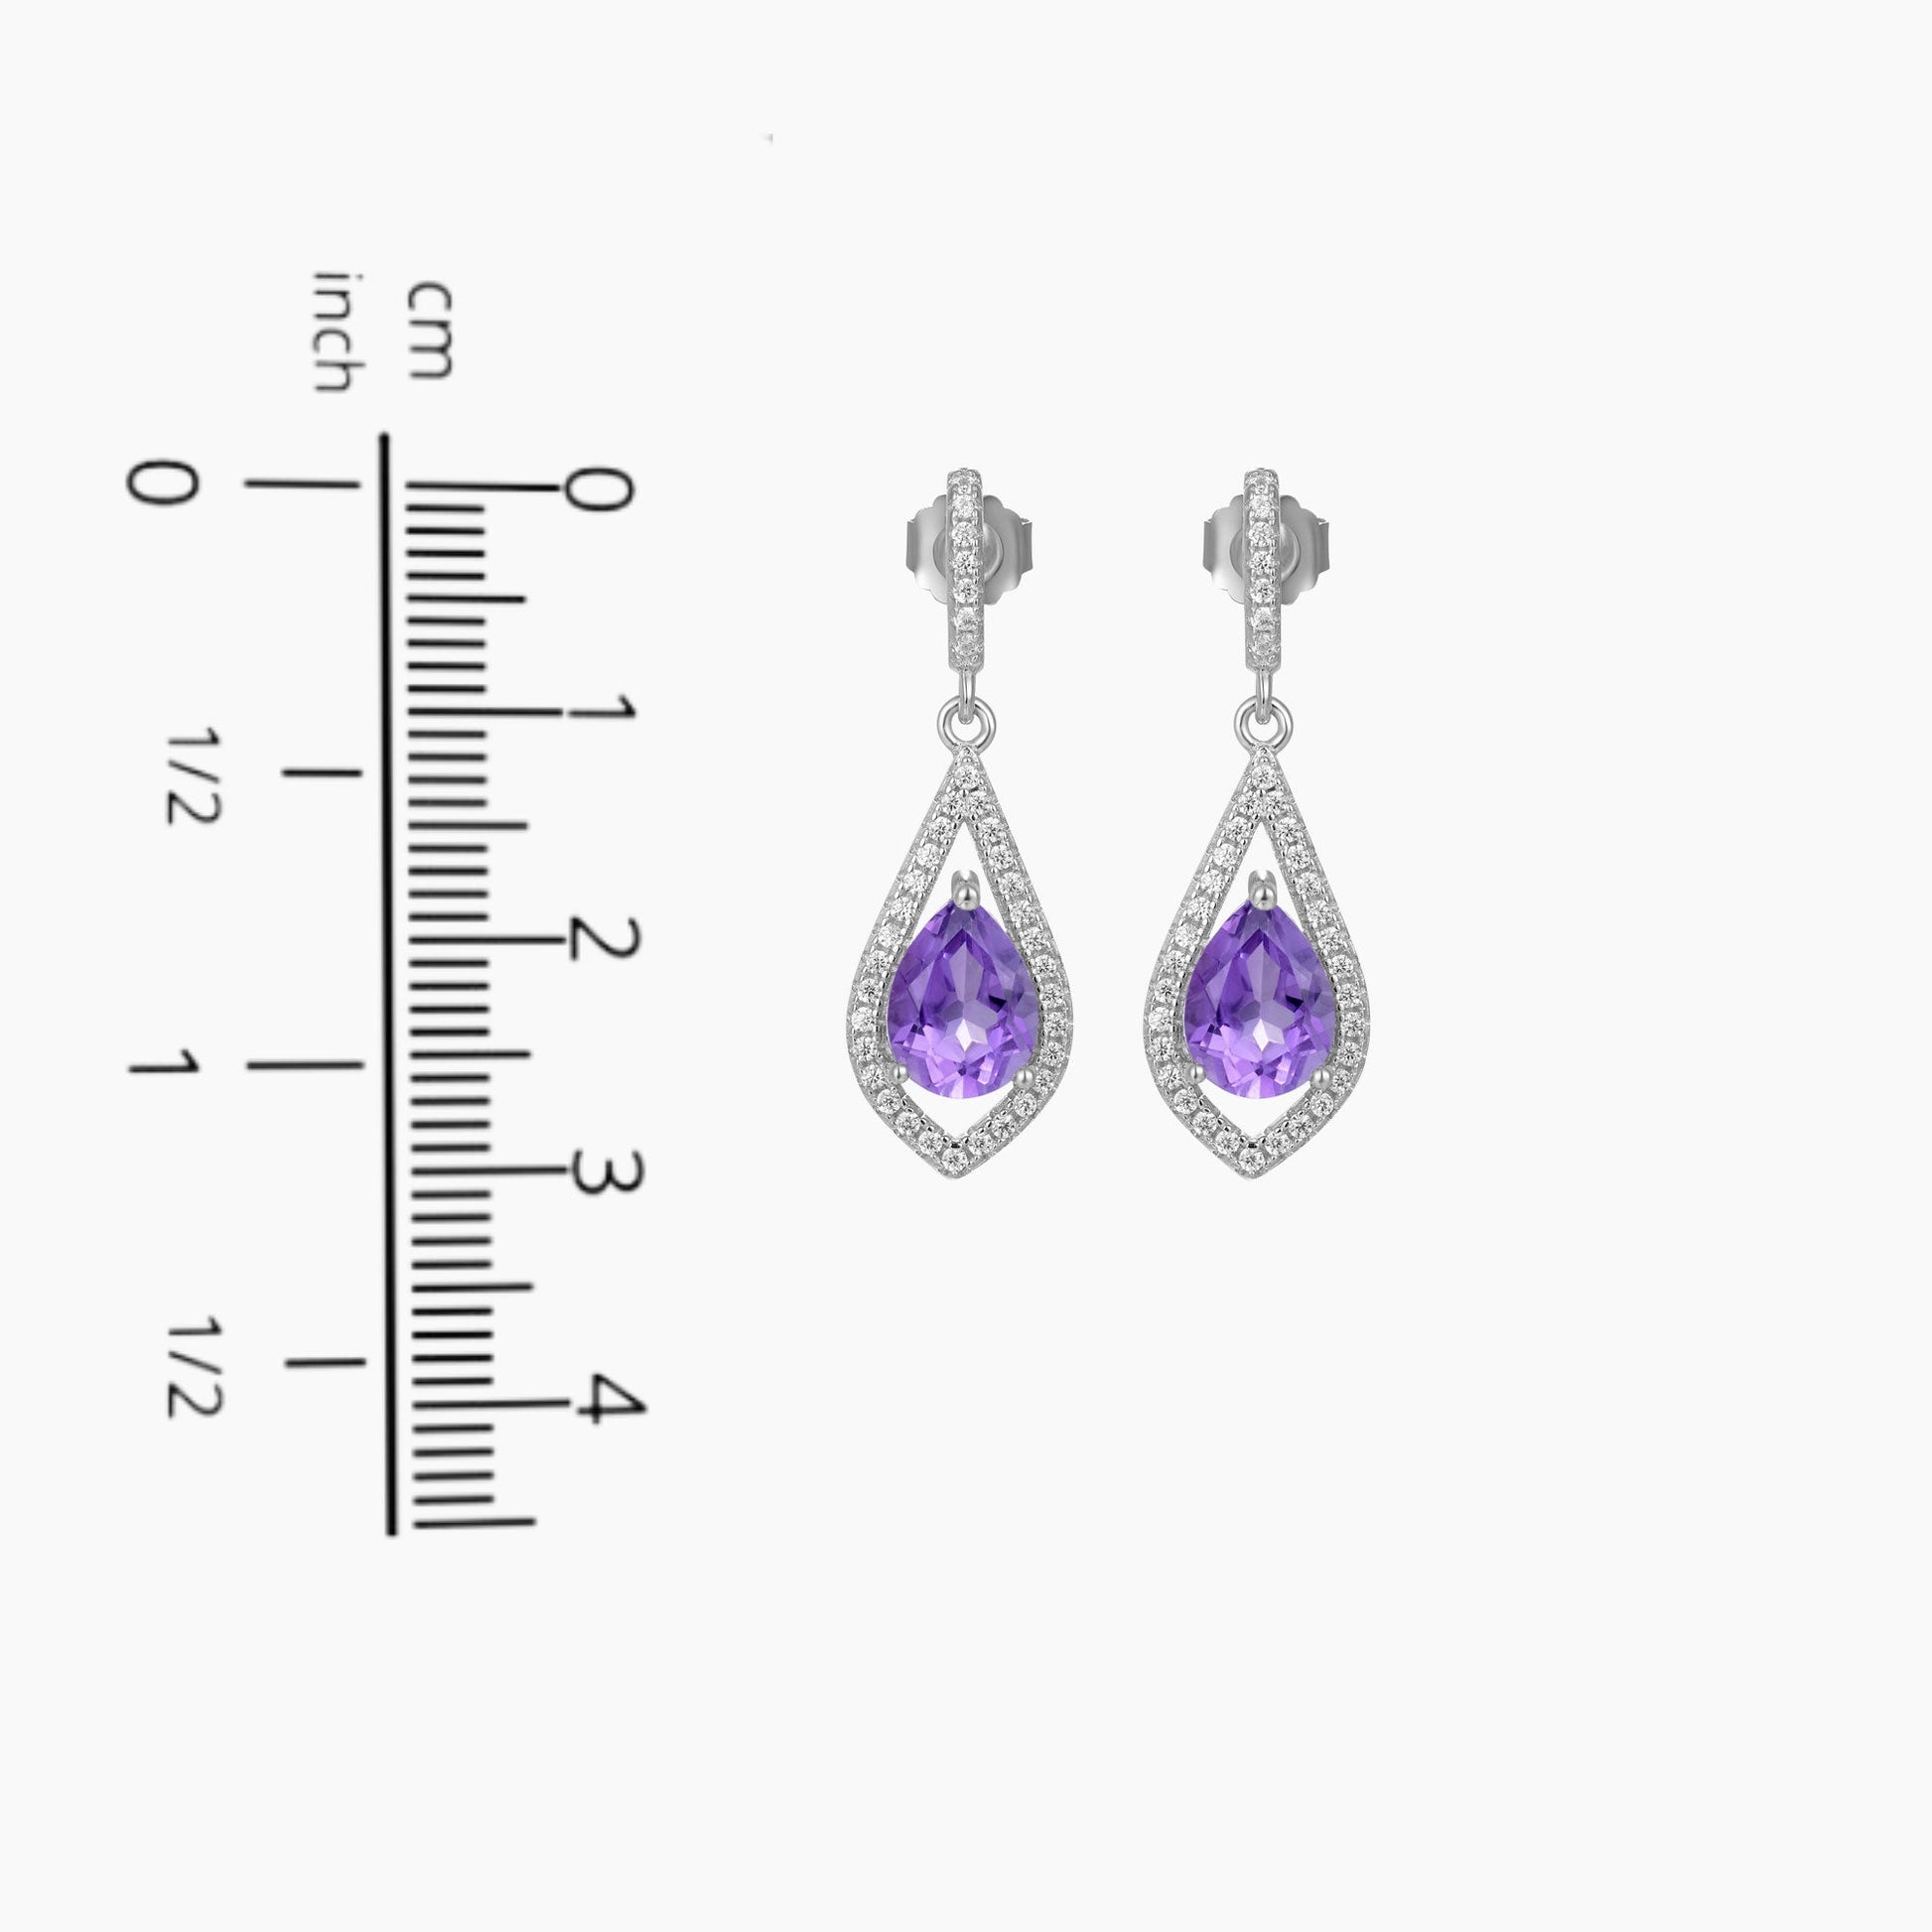 Amethyst Solitaire Earrings displayed on a scale to depict their size and dimensions accurately.